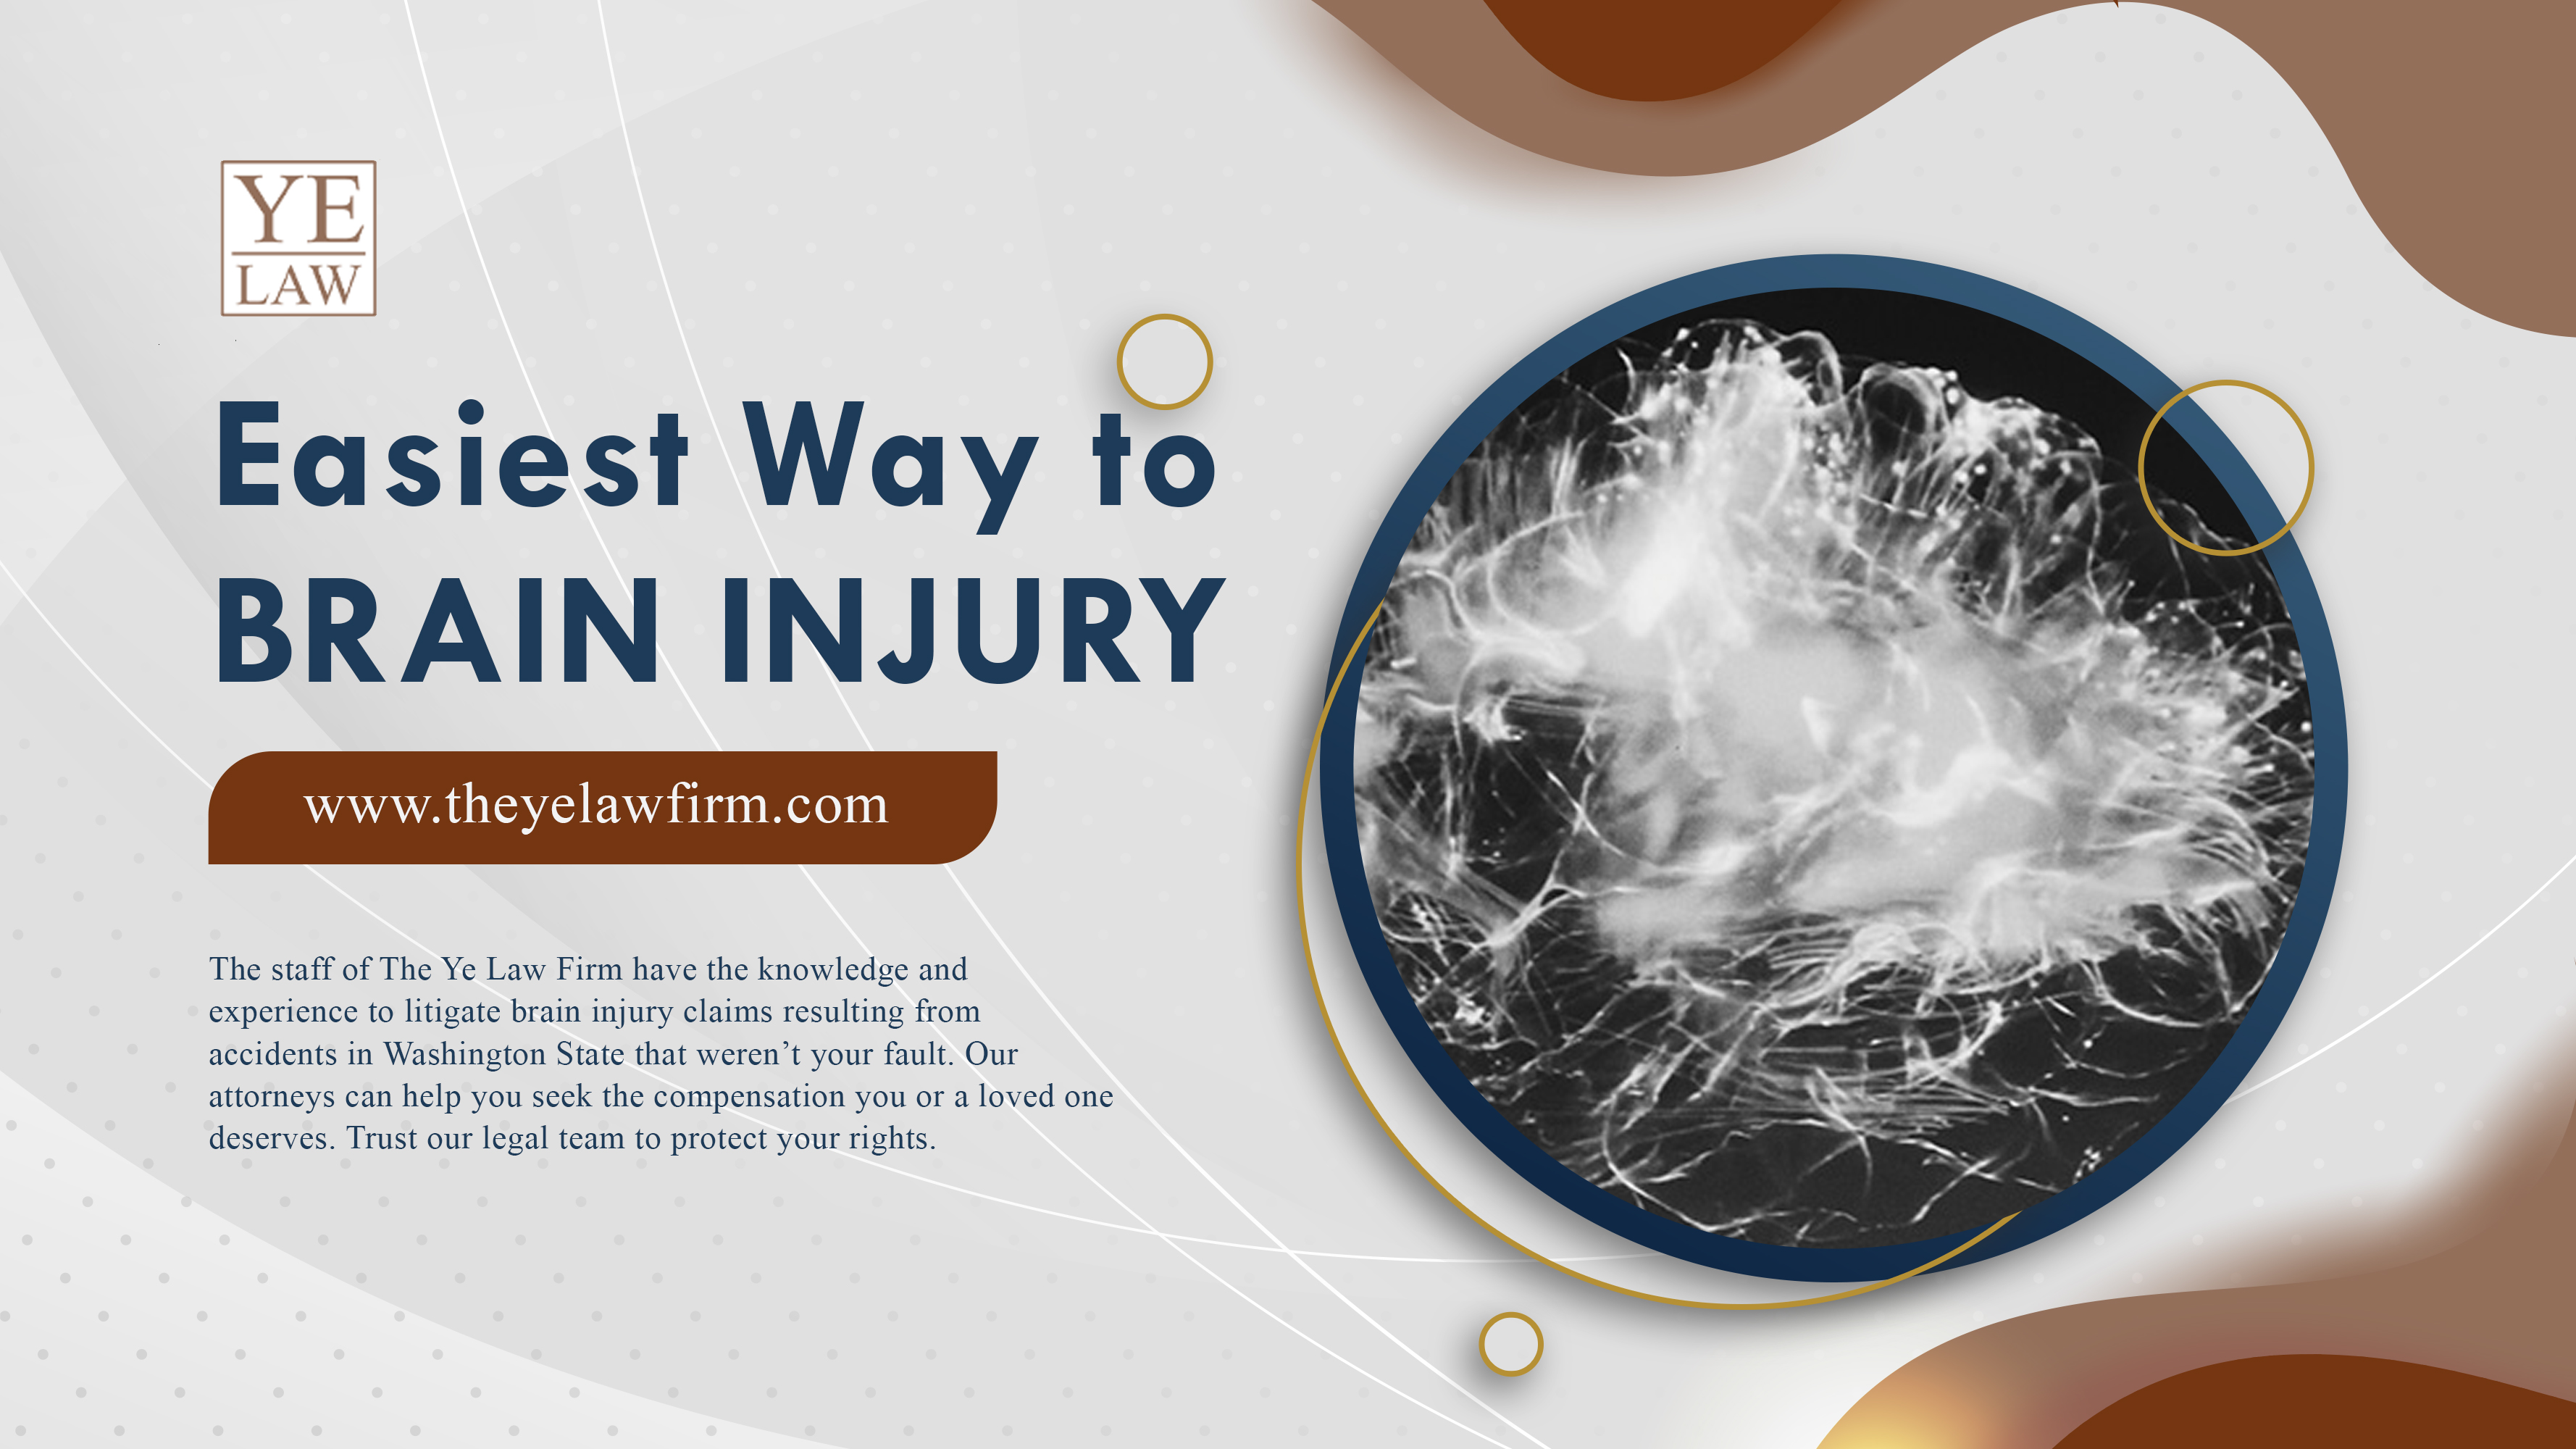 The Quickest & Easiest Way to BRAIN INJURY